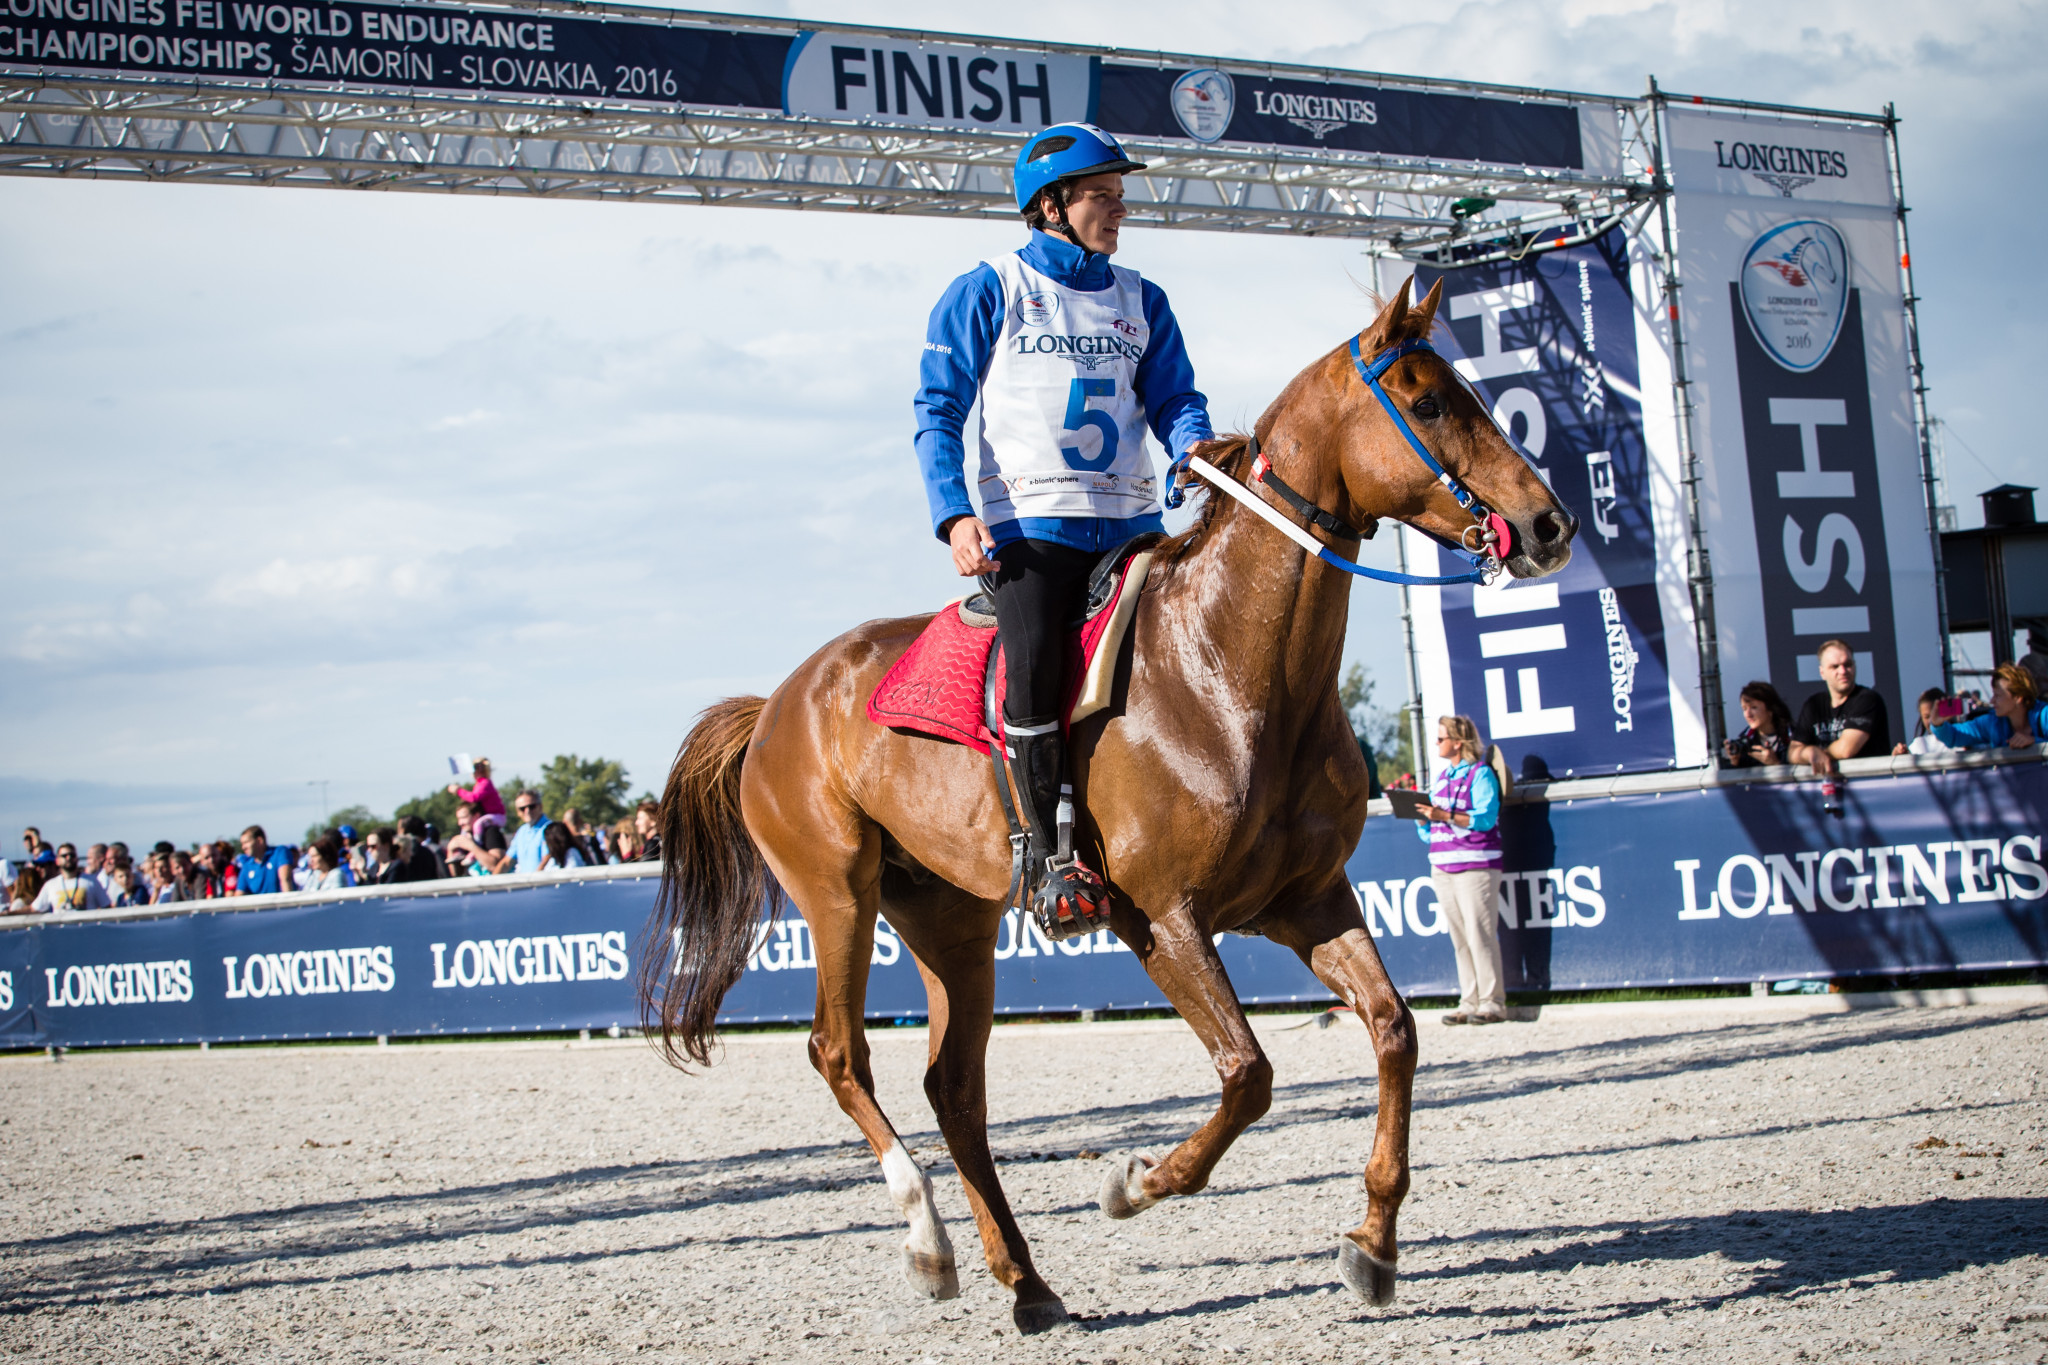 There are calls for endurance racing to focus again on horsemanship and the partnership between horse and human and for there to be less emphasis on winning ©FEI  